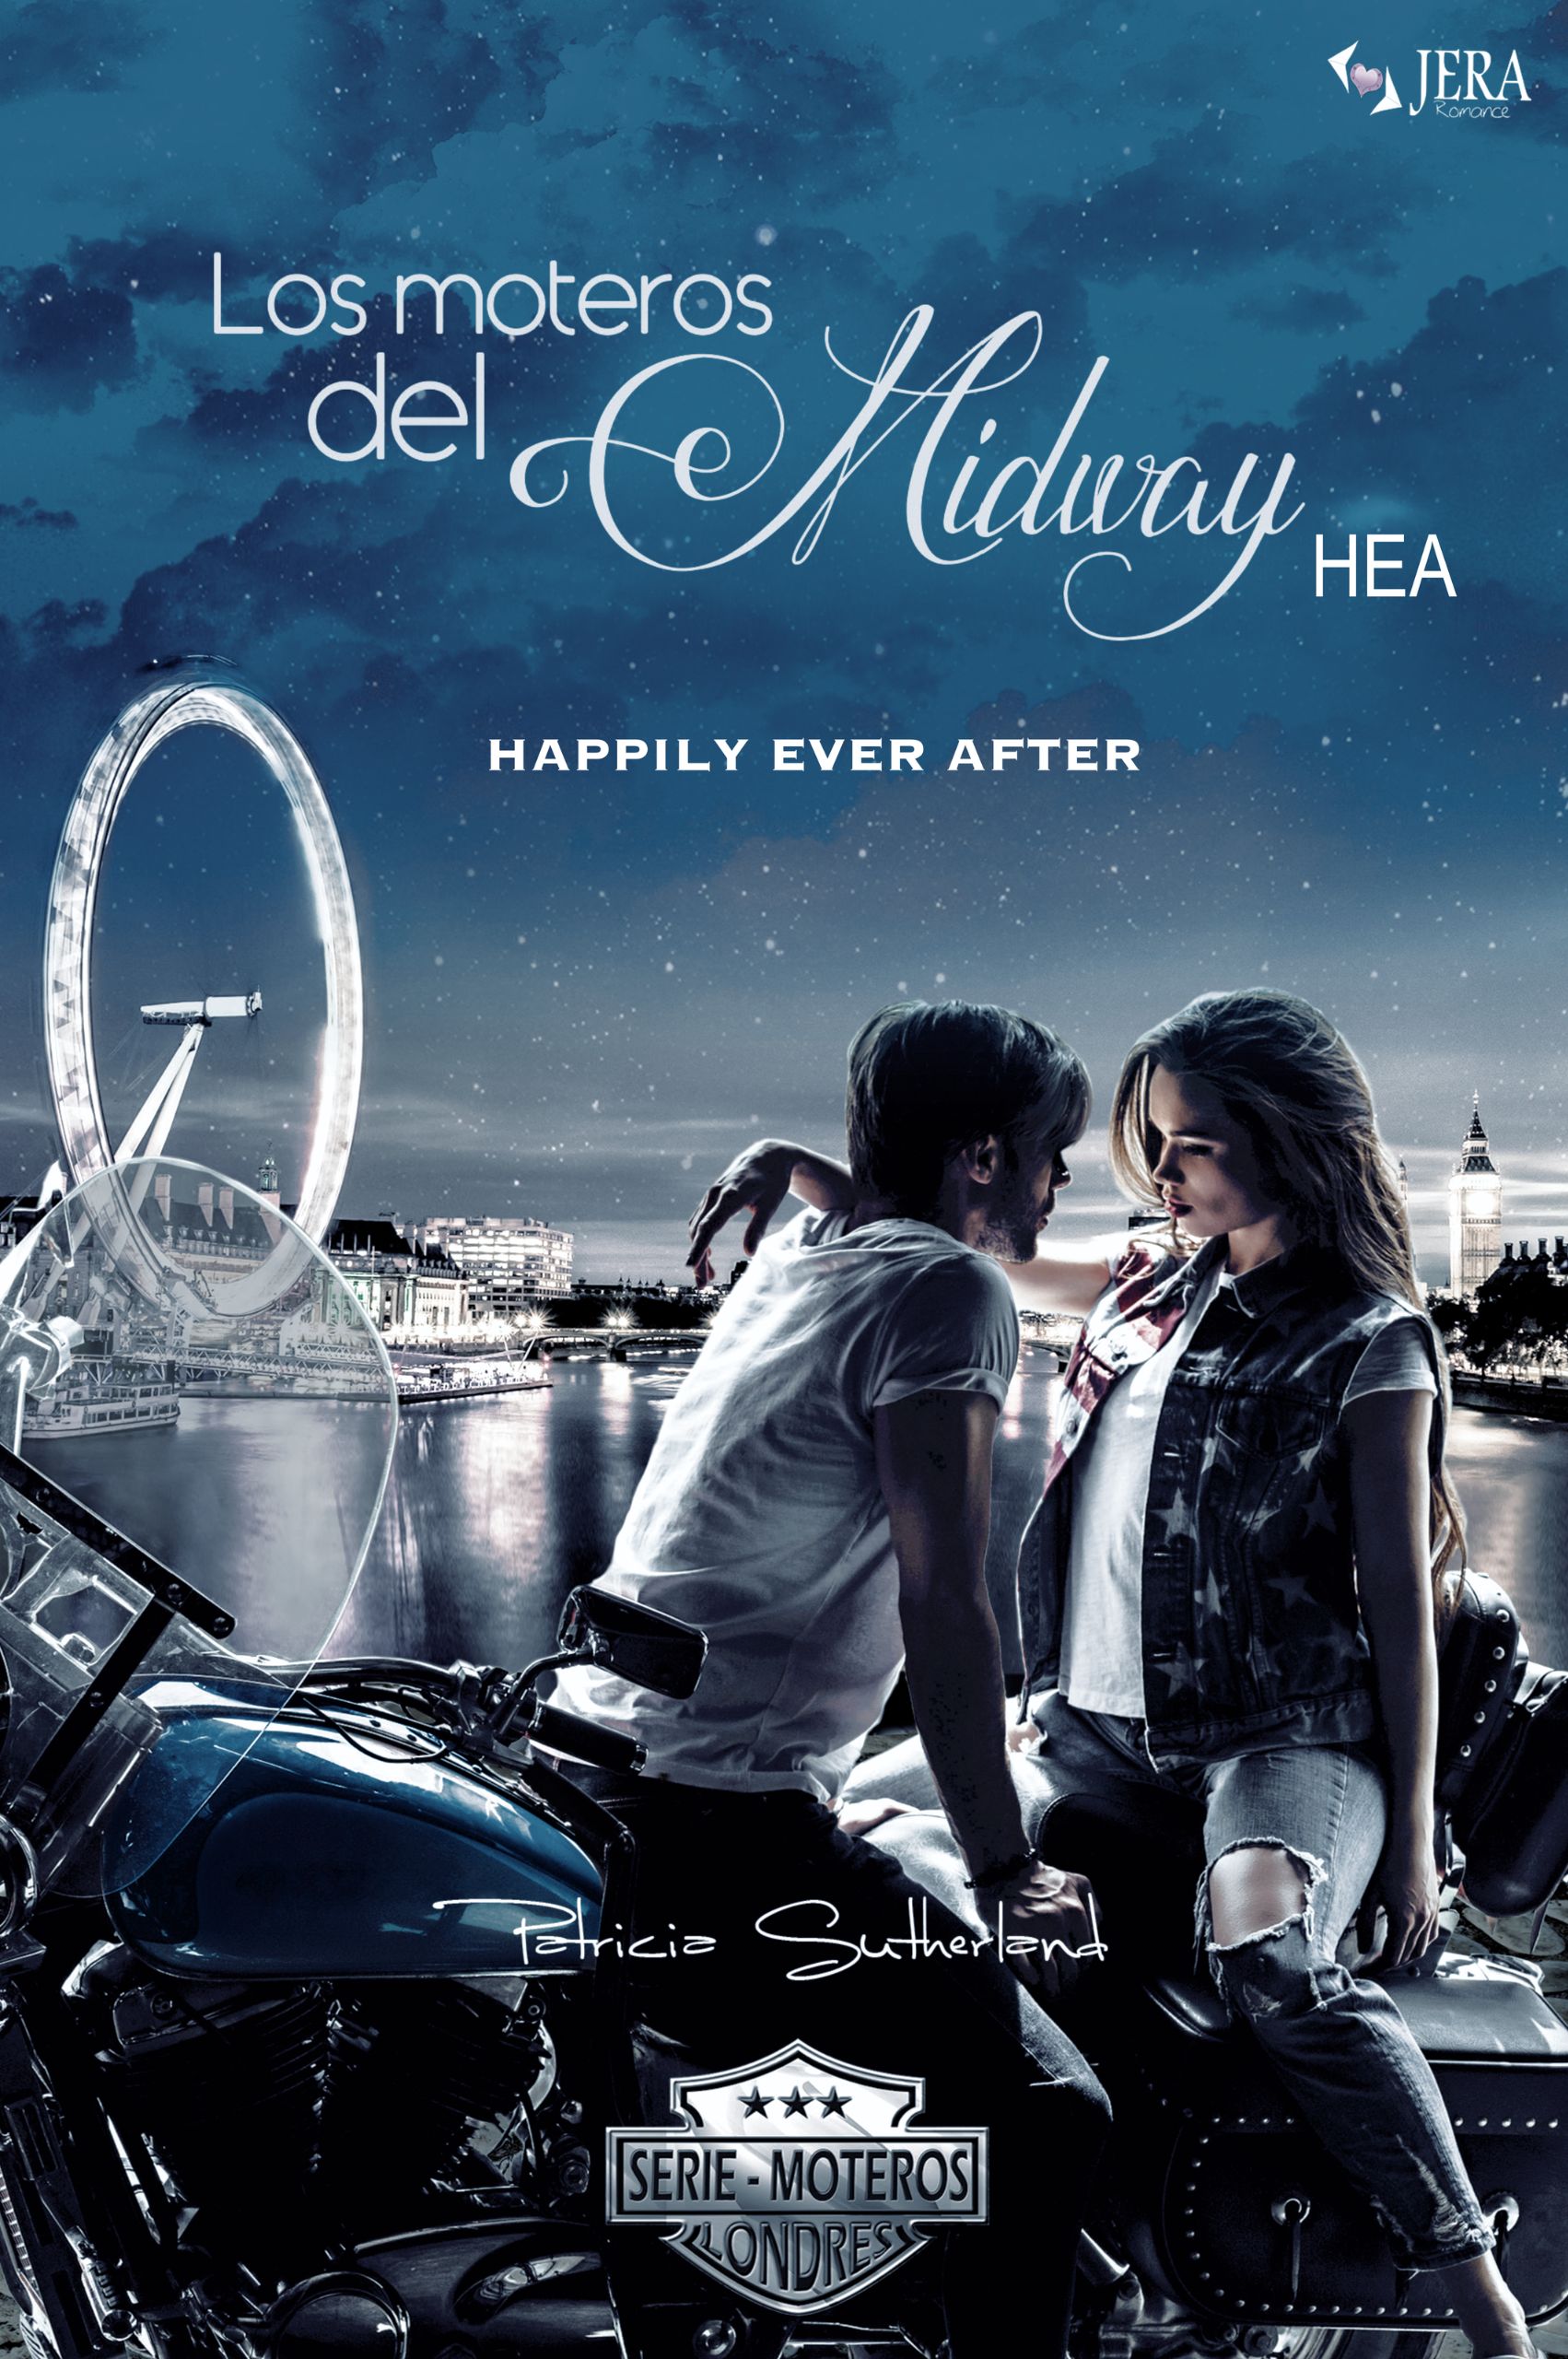 Los moteros del MidWay, HEA (Happily Ever After)
Extras Serie Moteros # 14